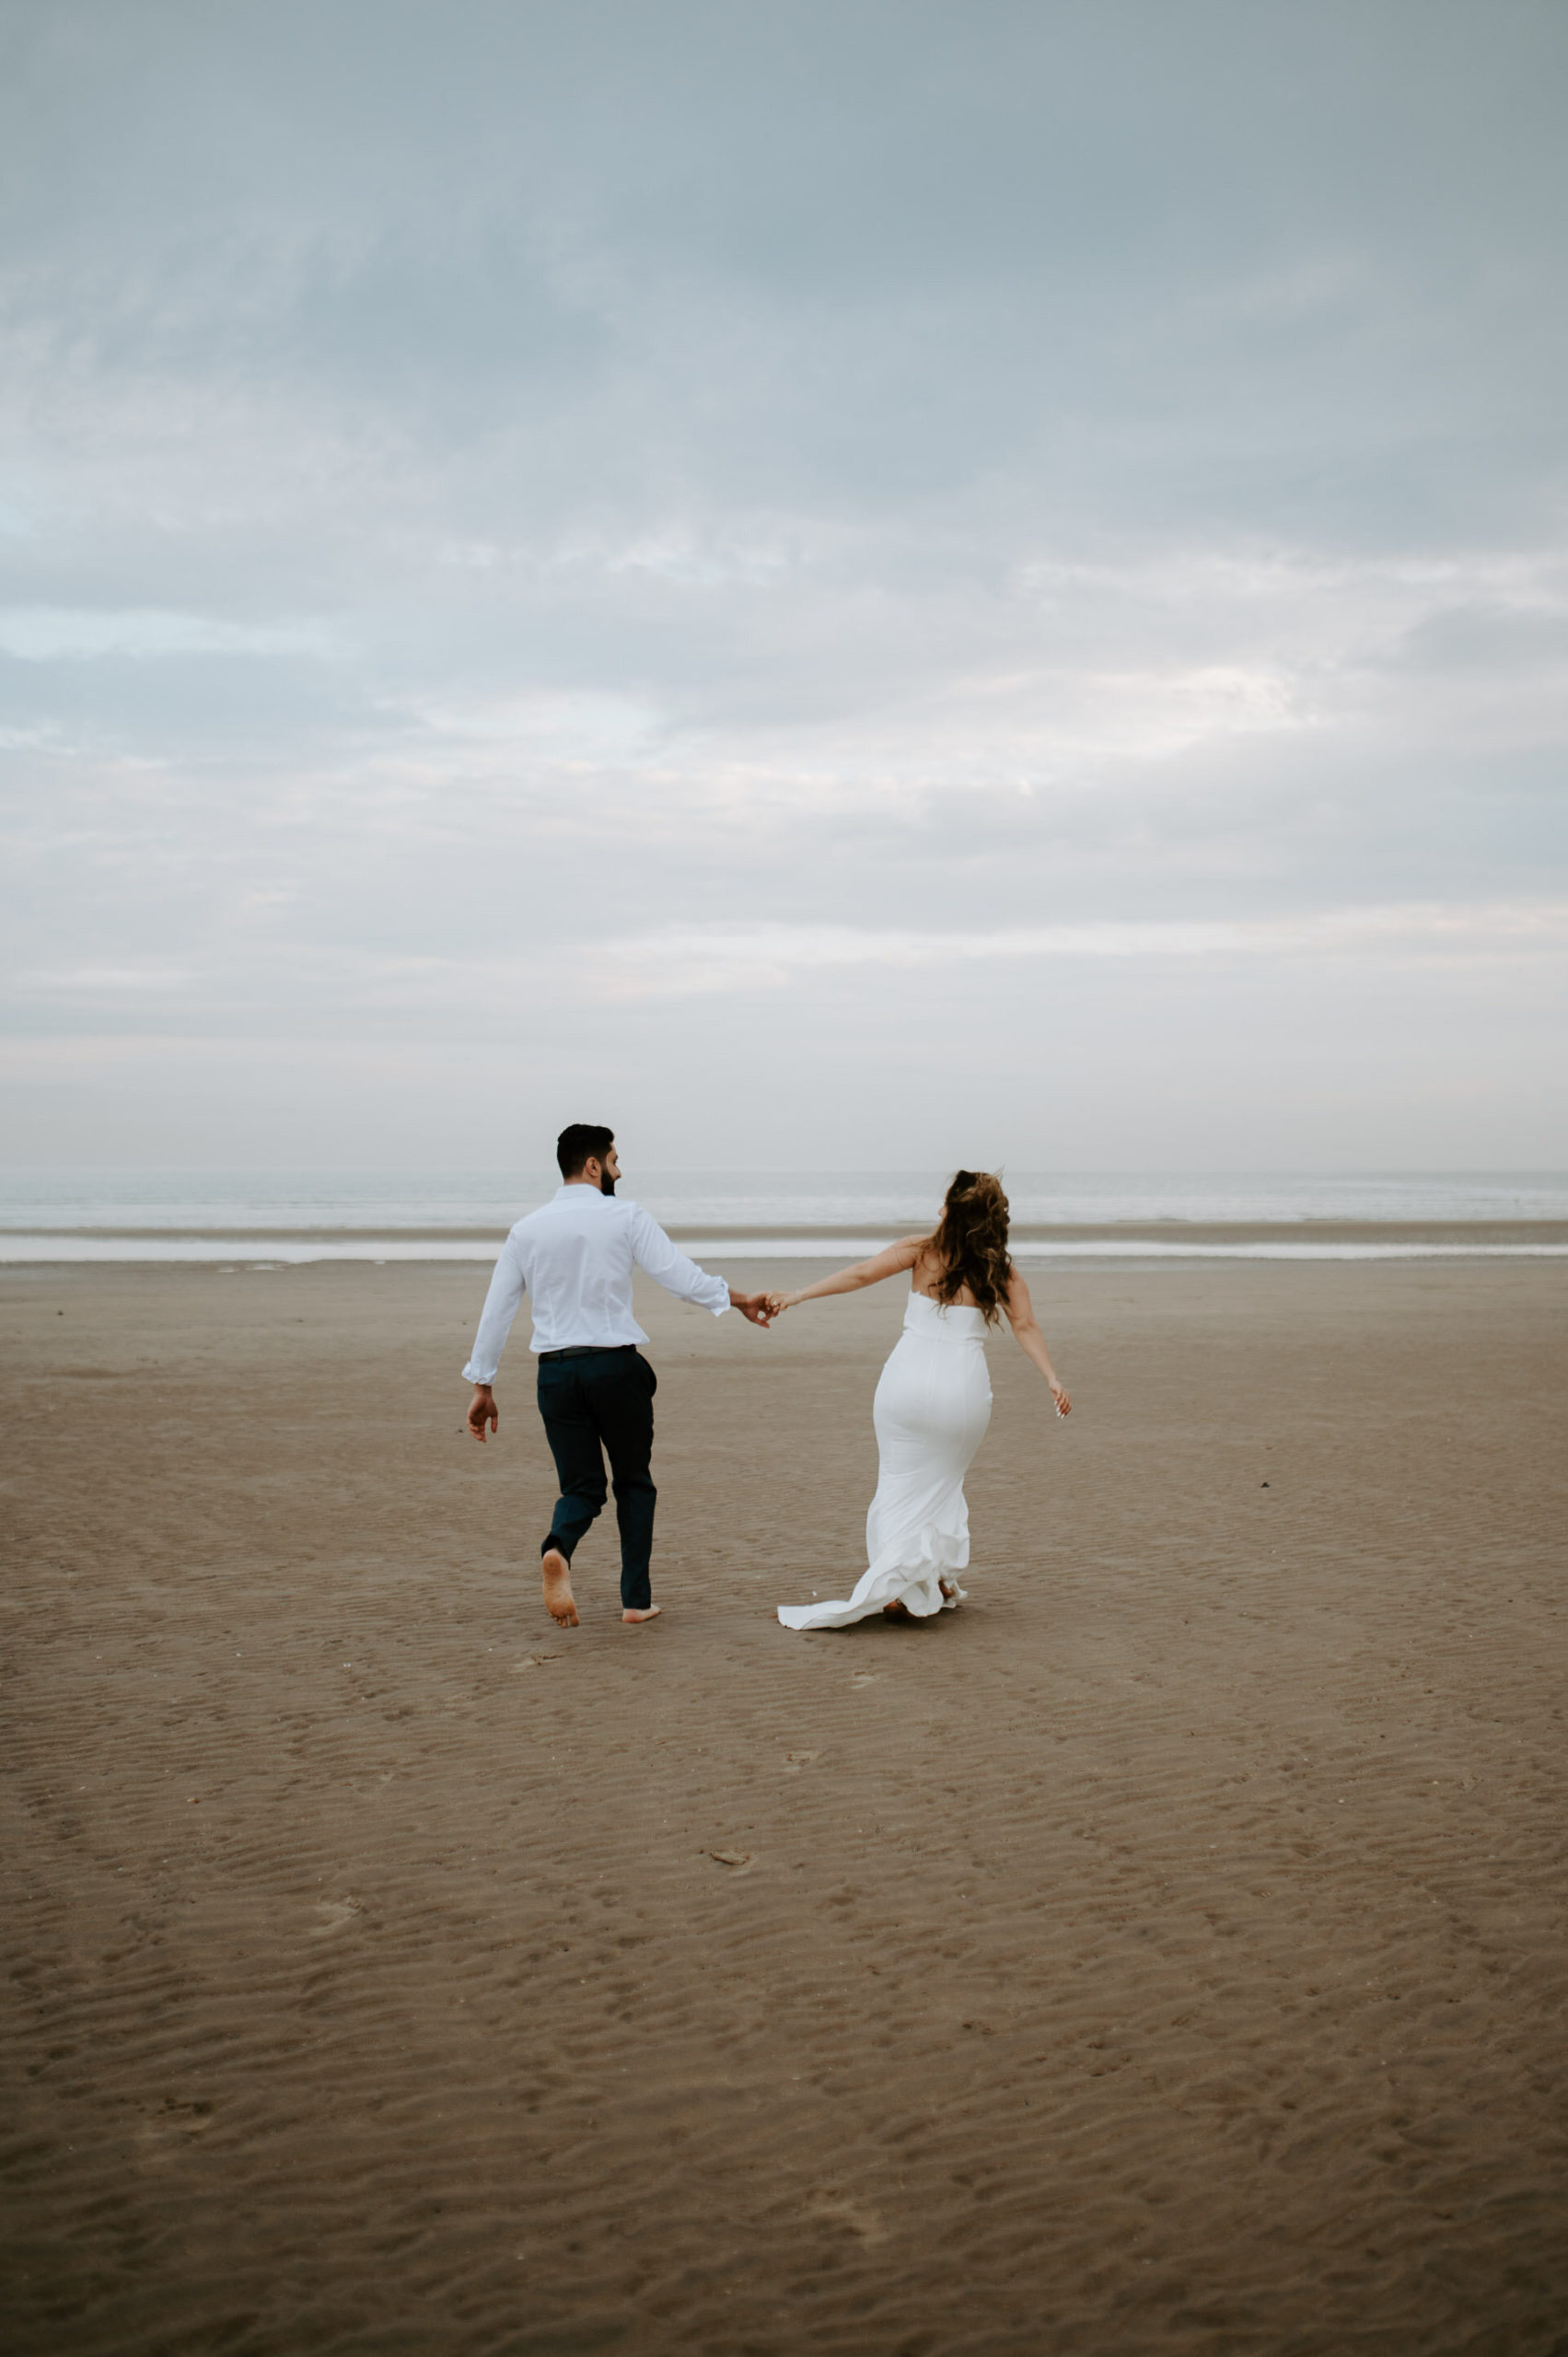 Demiana and Goergeuos - Camber Sands Golden Hour Beach Shoot - Laura Williams Photography-16.jpg